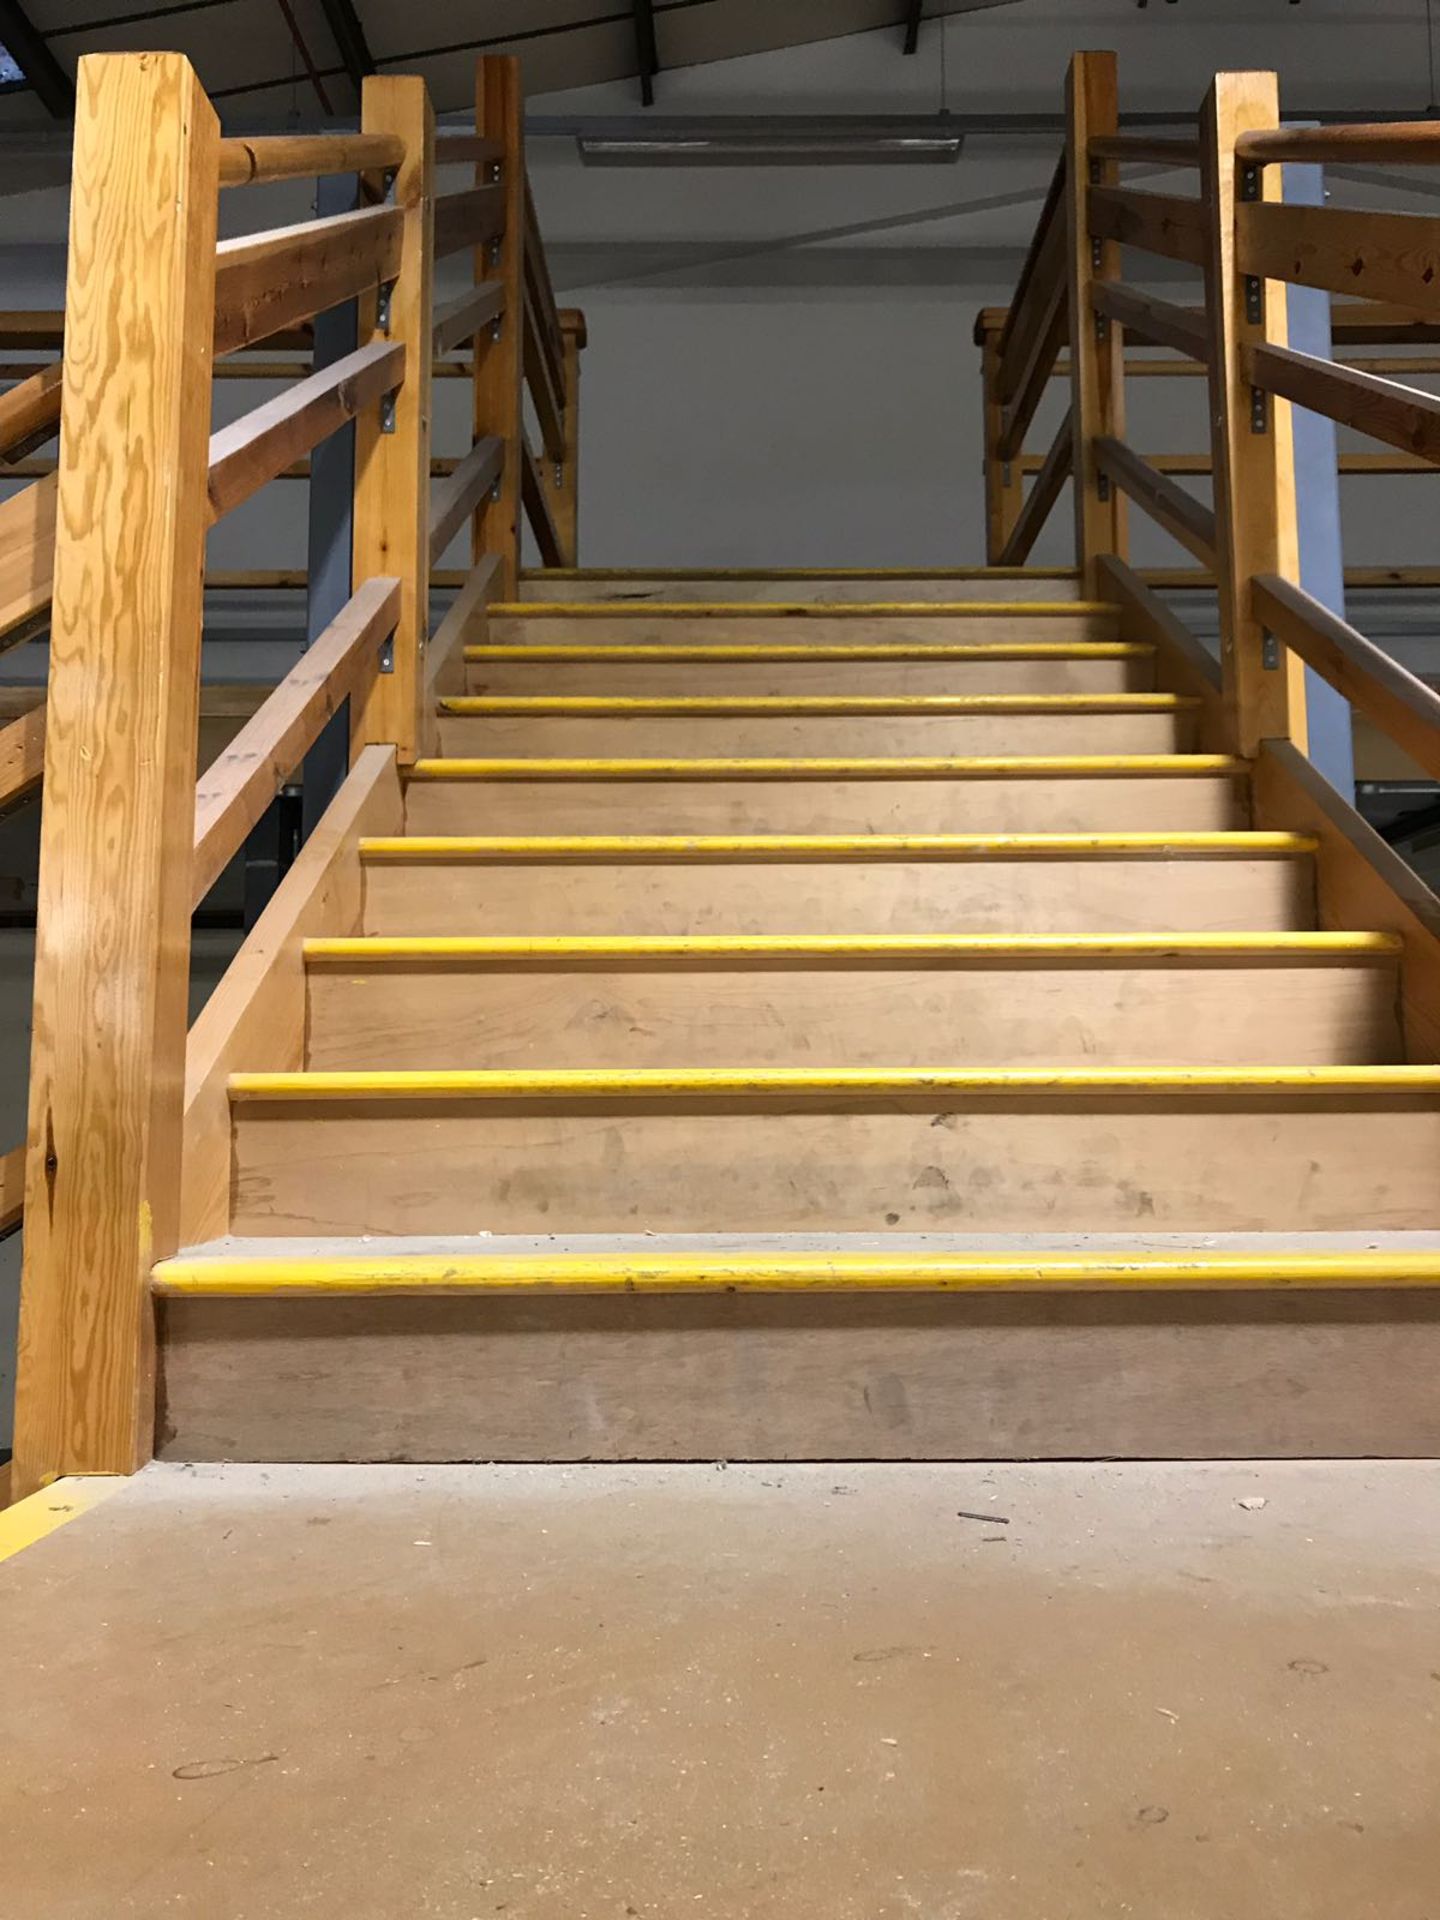 Wooden Staircase Buyer To remove - Image 2 of 2